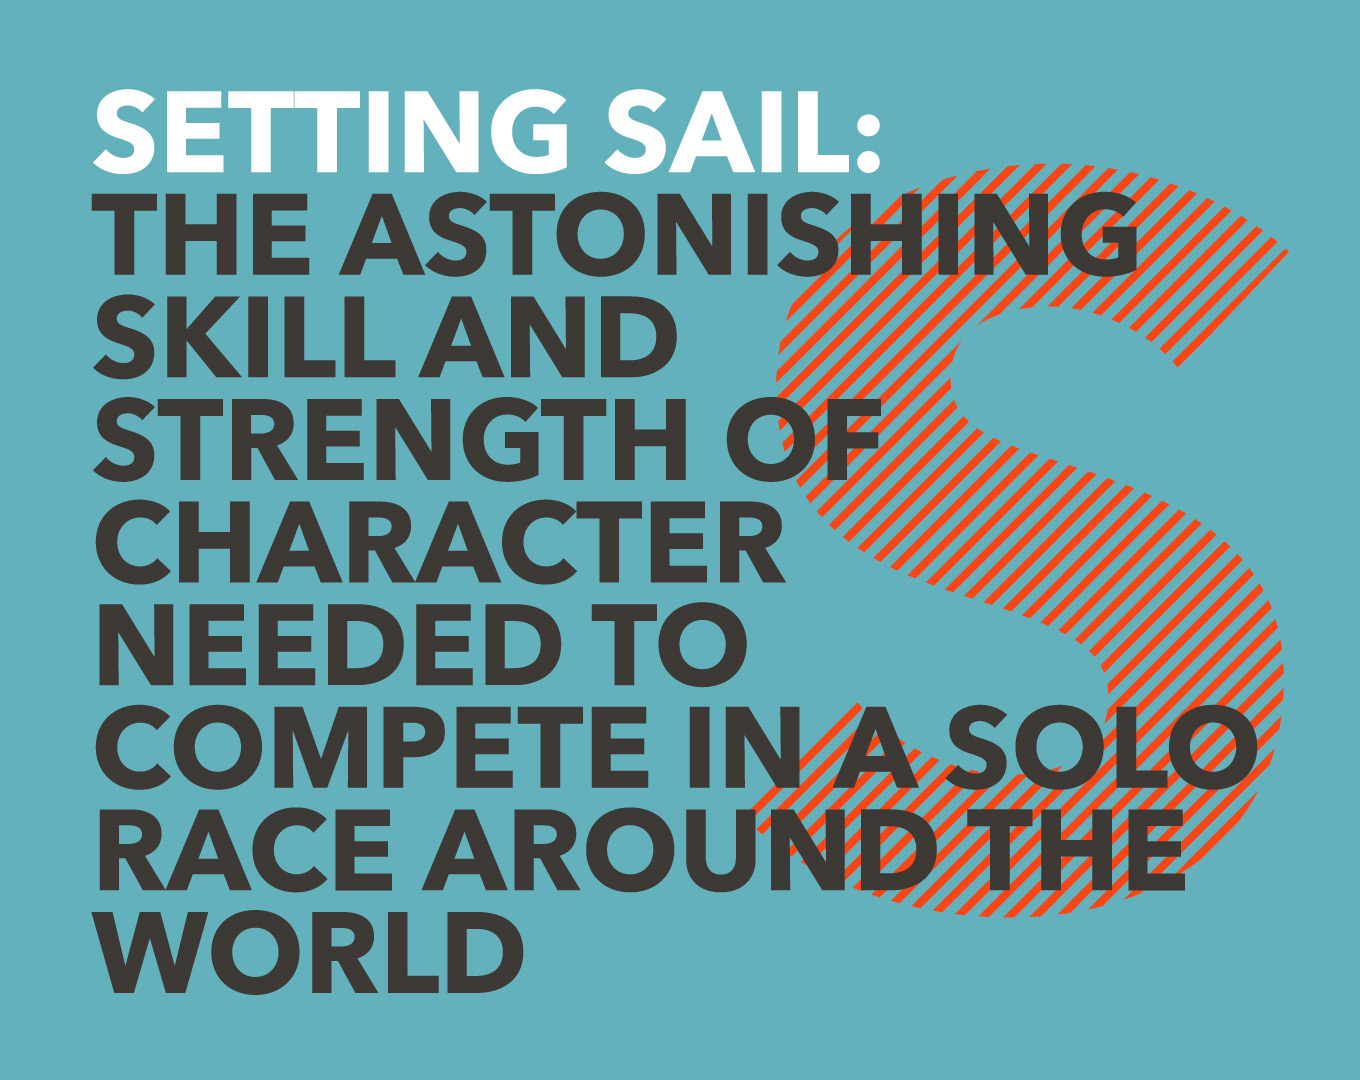 Setting sail: The astonishing skill and strength of character needed to compete in a solo race around the world